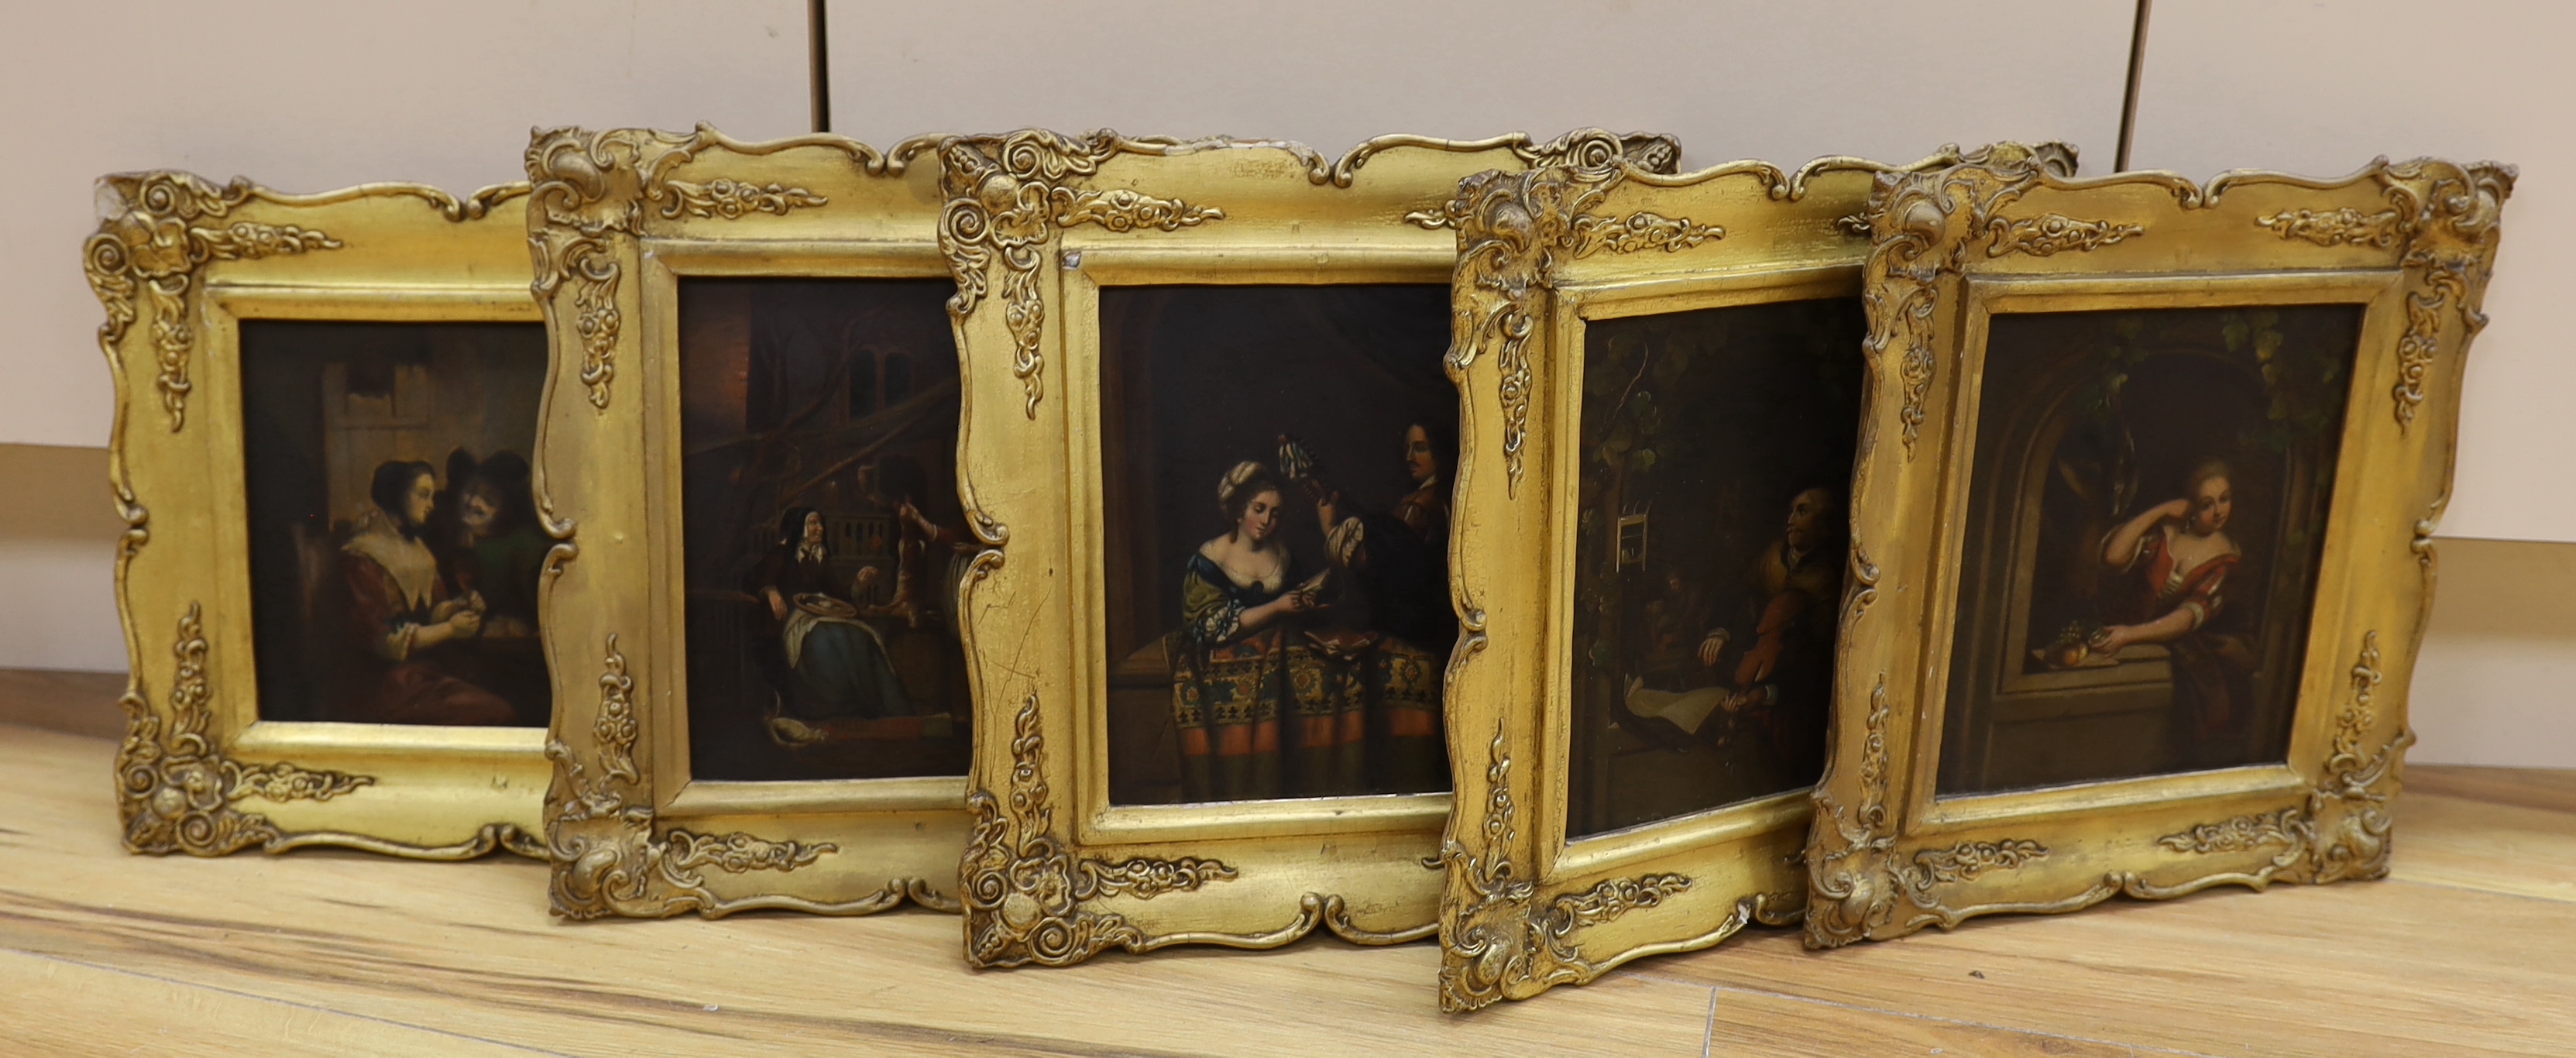 19th century German school, set of five oils on zinc, including figure playing a violin and a tavern scene, ornate gilt framed, 19 x 16cm